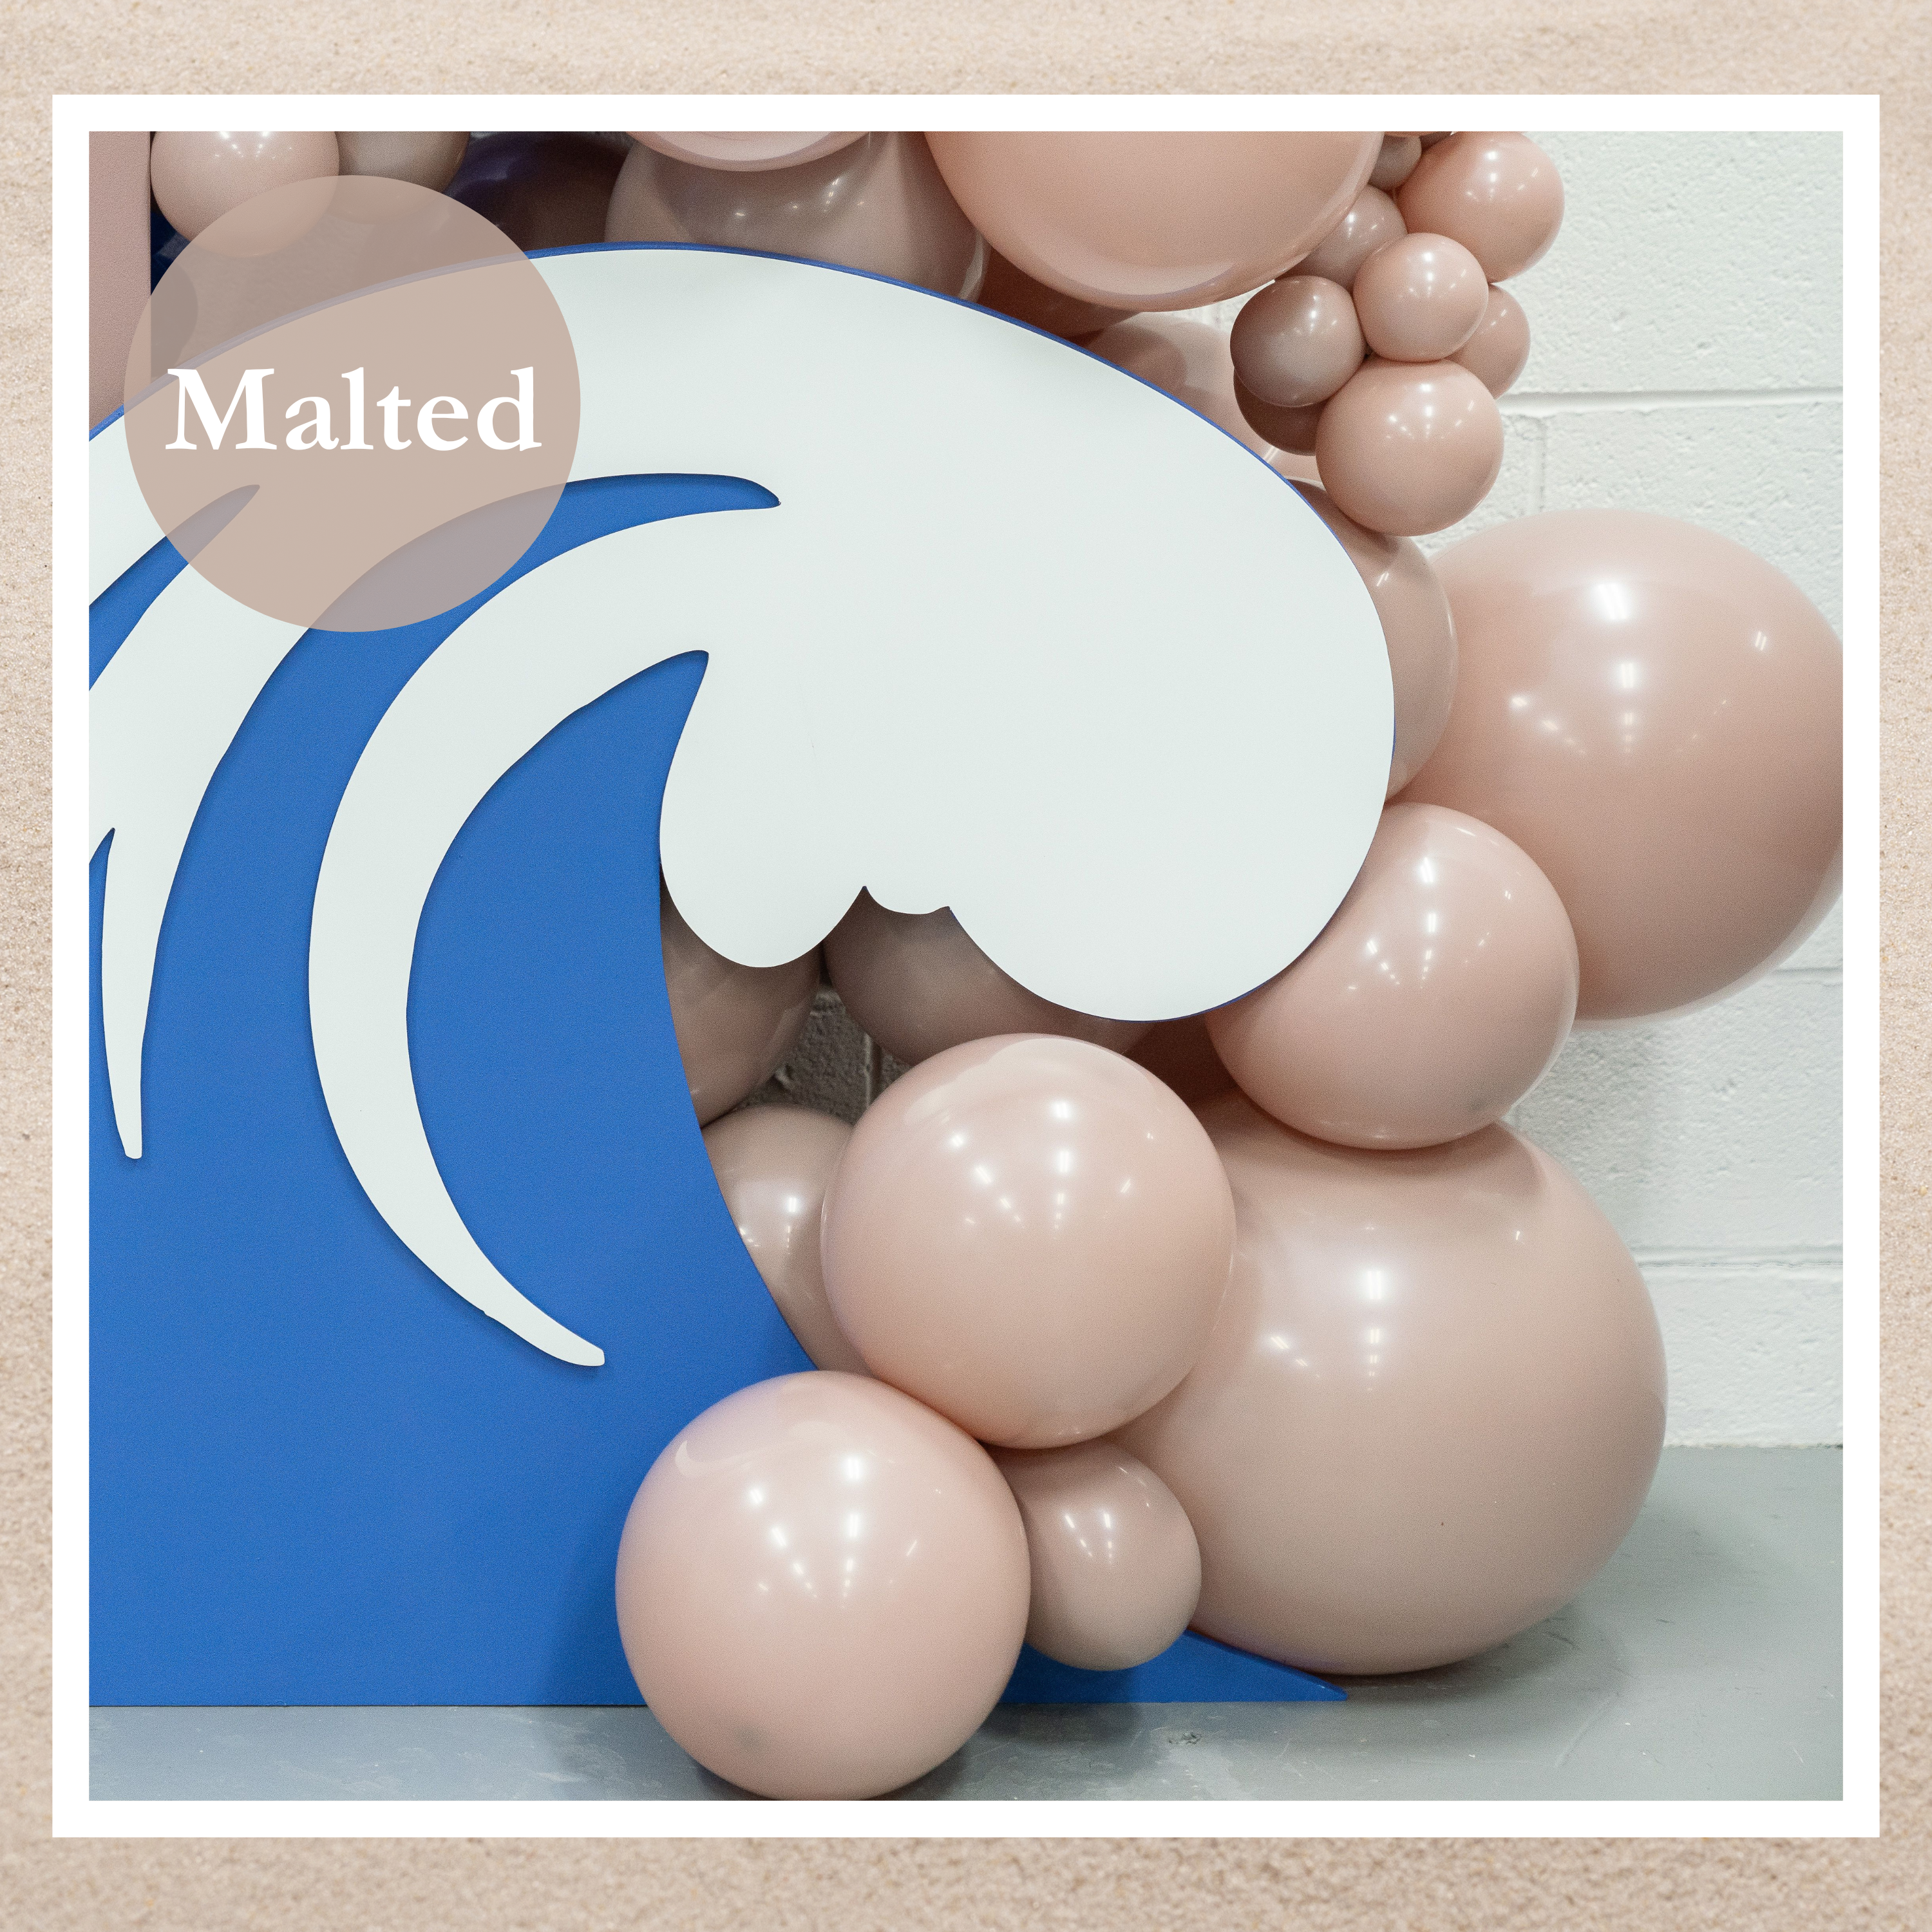 36" TUFTEX Malted - Tan Latex Balloons - 3 Foot Giant | 2 Count